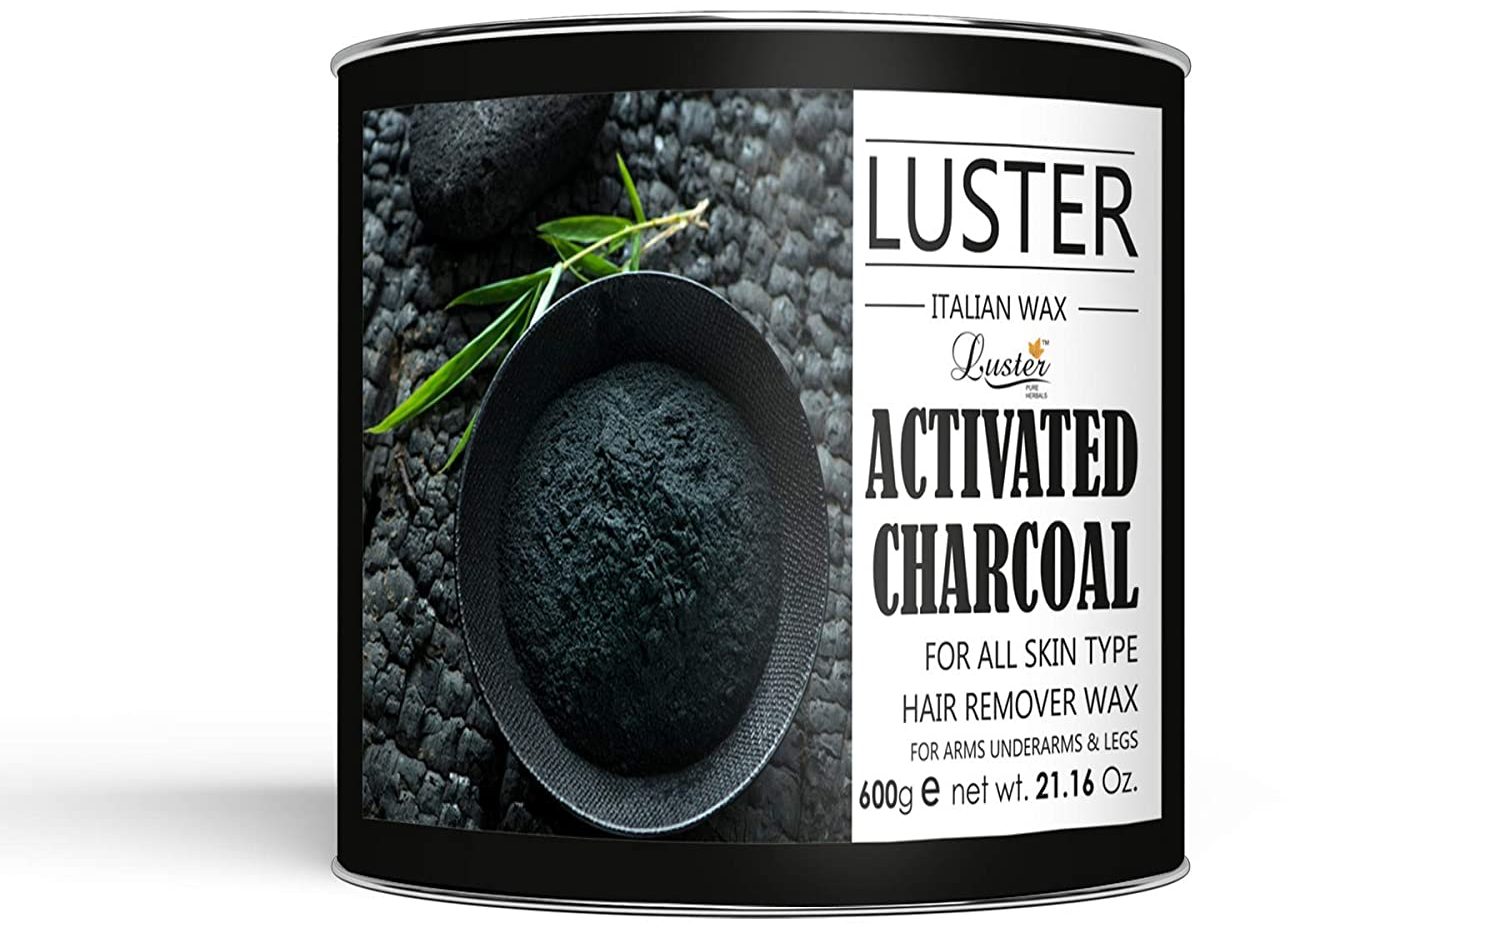 luster-activated-charcoal-hair-removal-hot-wax